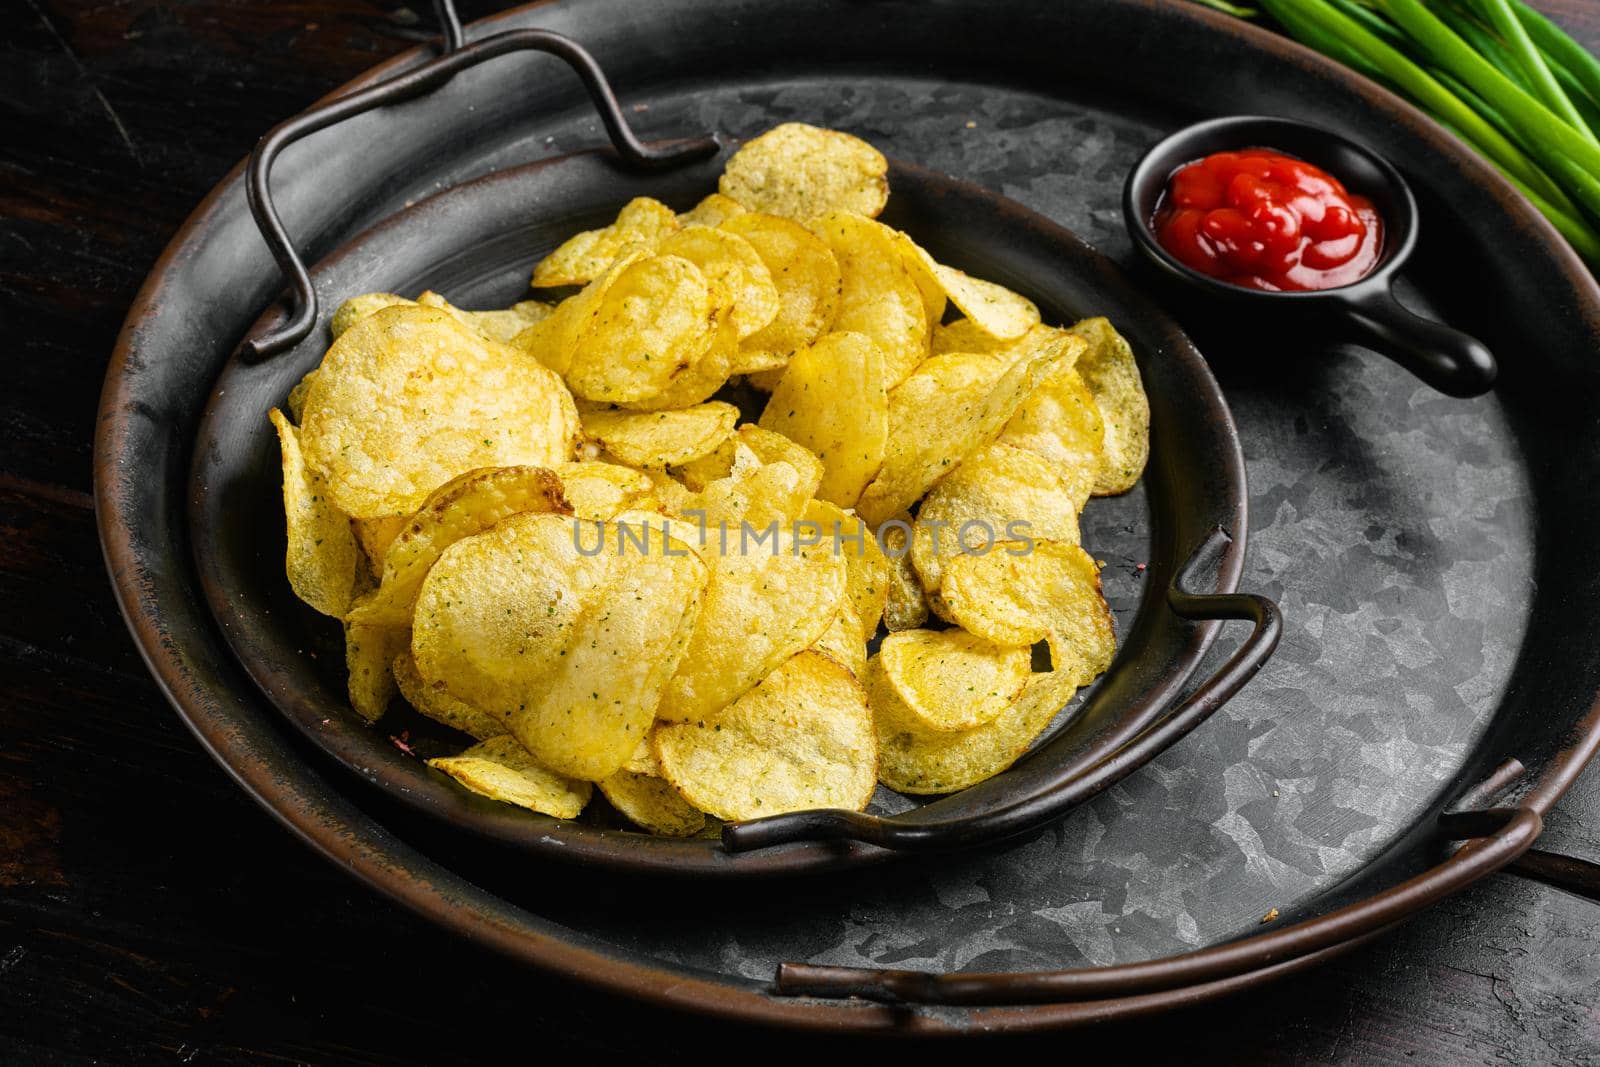 Home made potato chips on old dark wooden table background by Ilianesolenyi